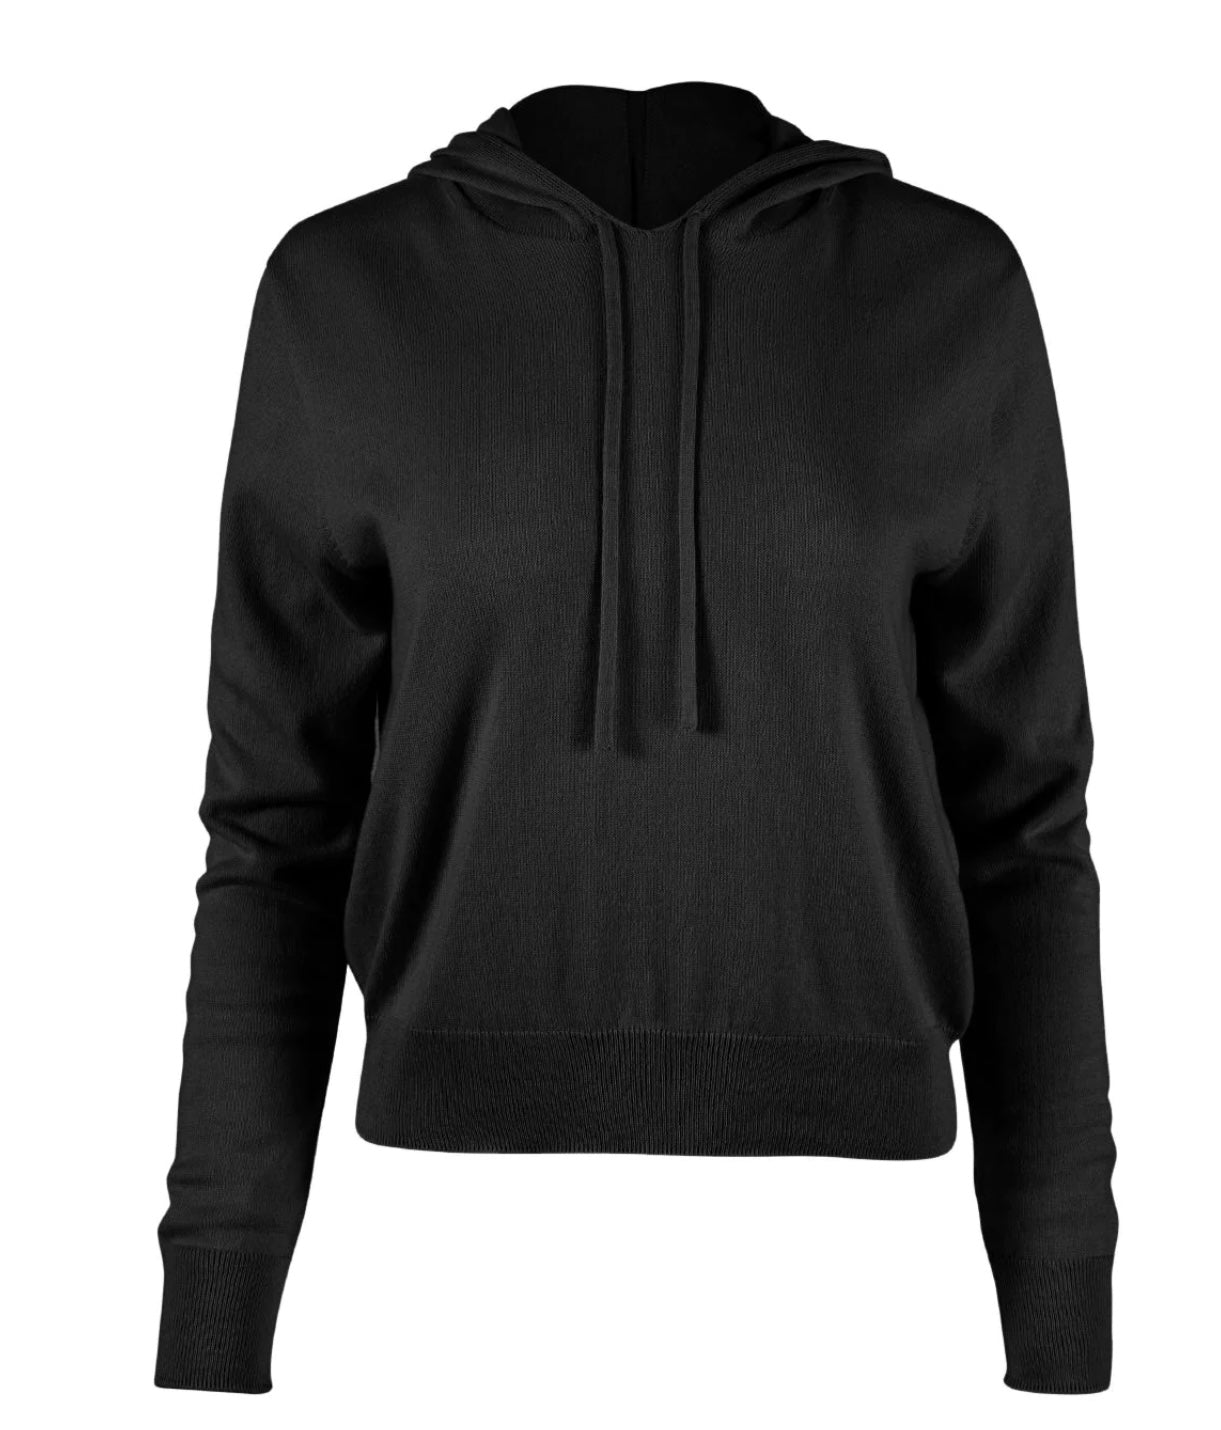 Sskein - Cropped Hoodie in Many Colors